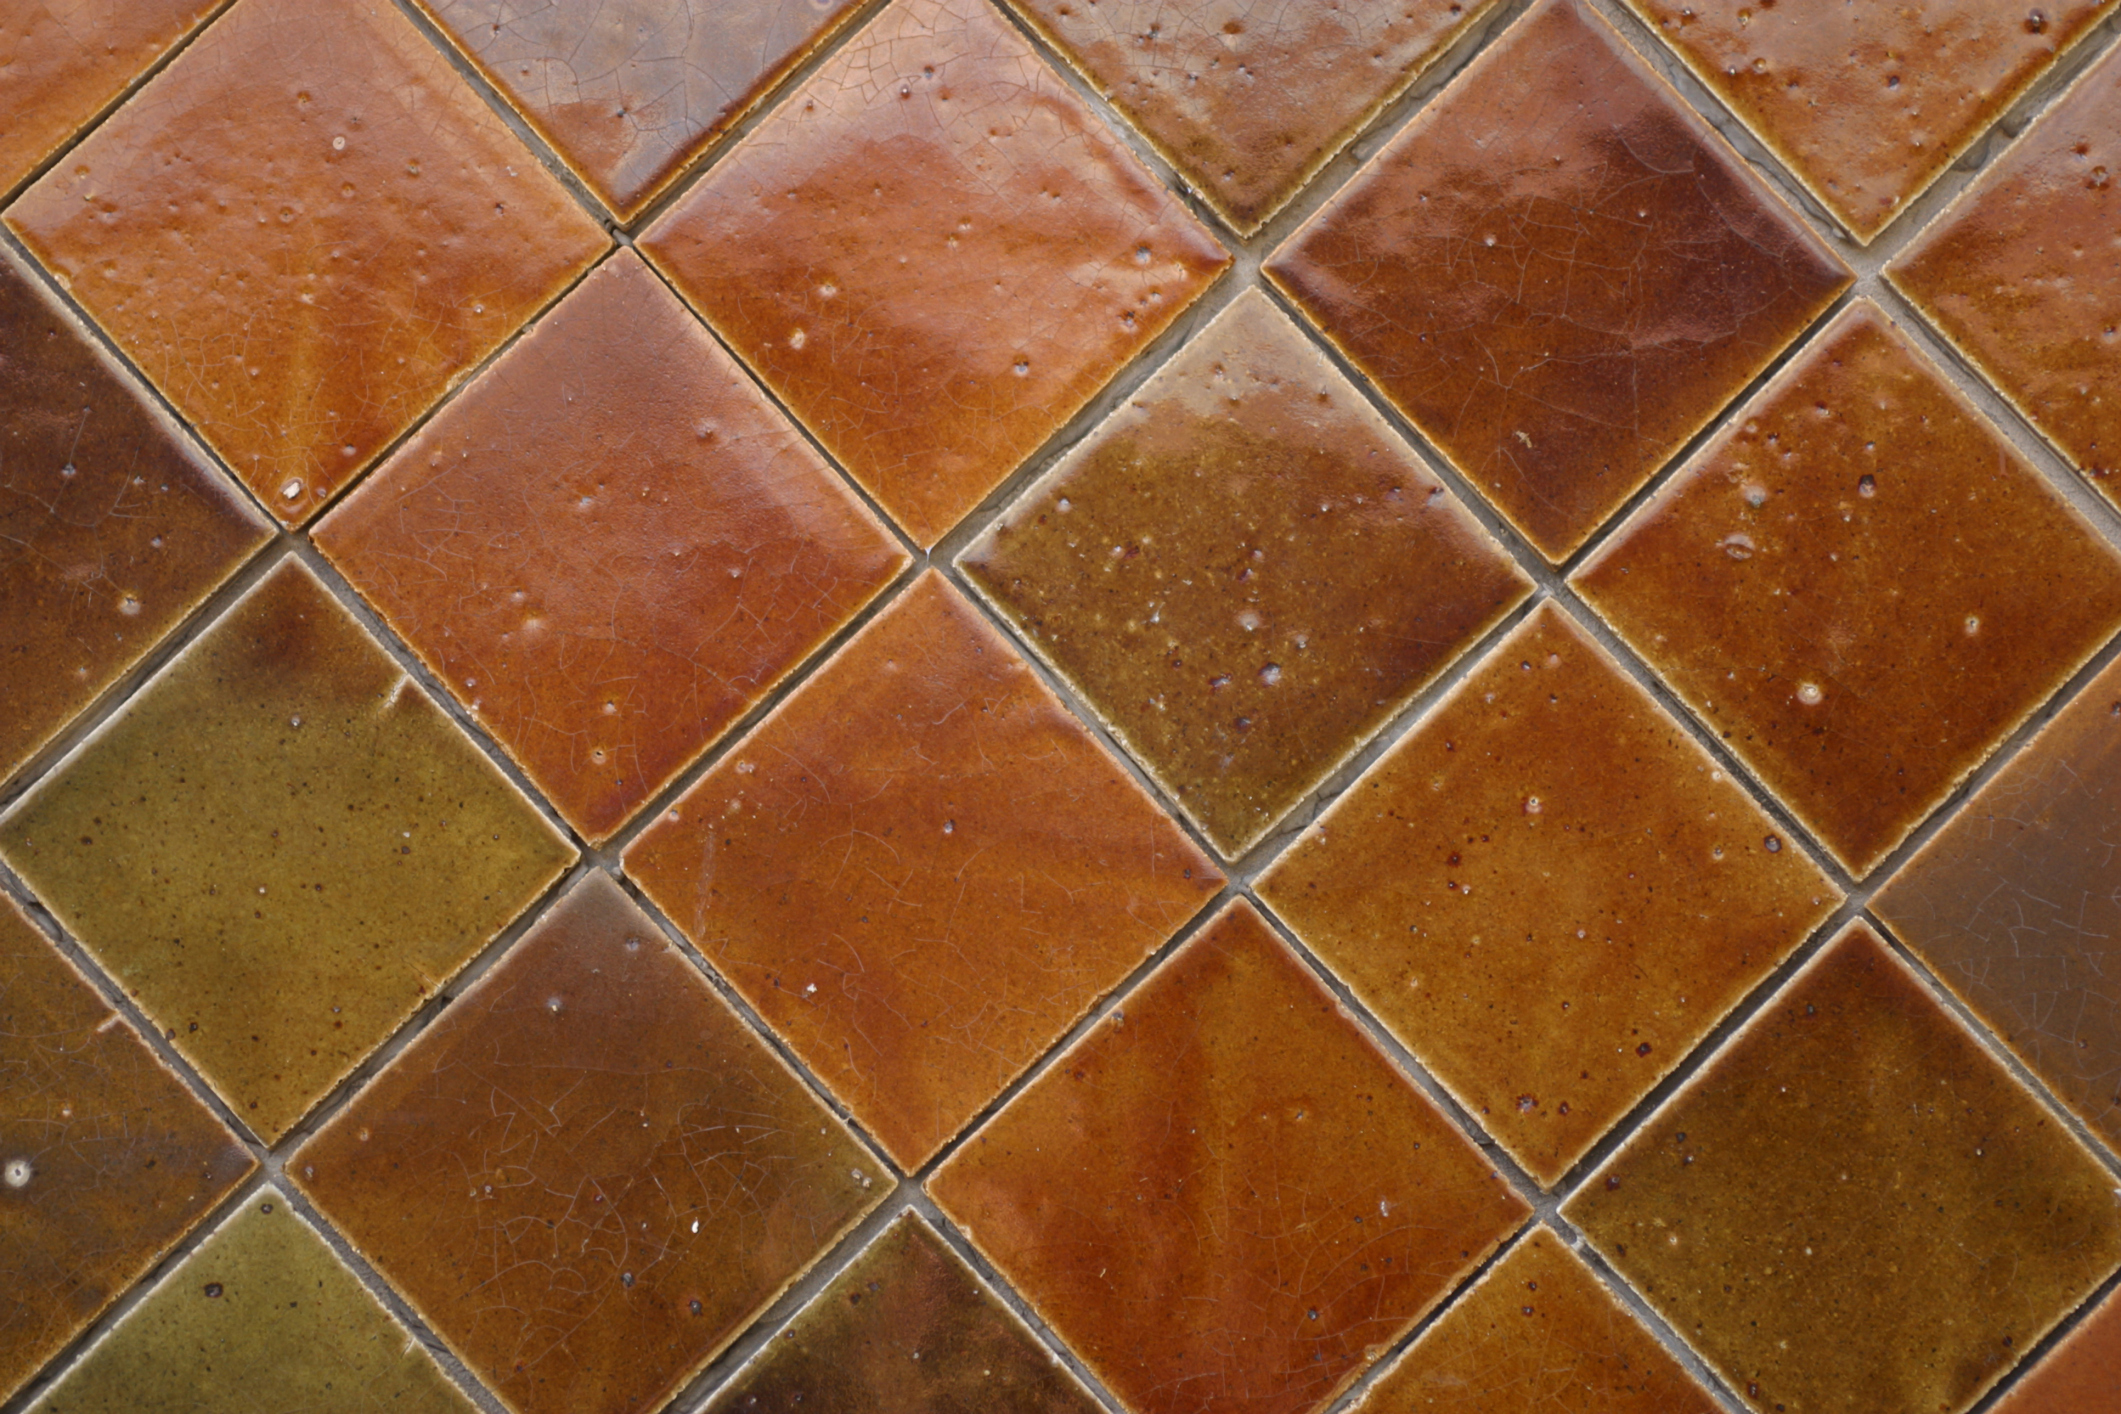 How To Remove The Glaze From Ceramic Tile Hunker